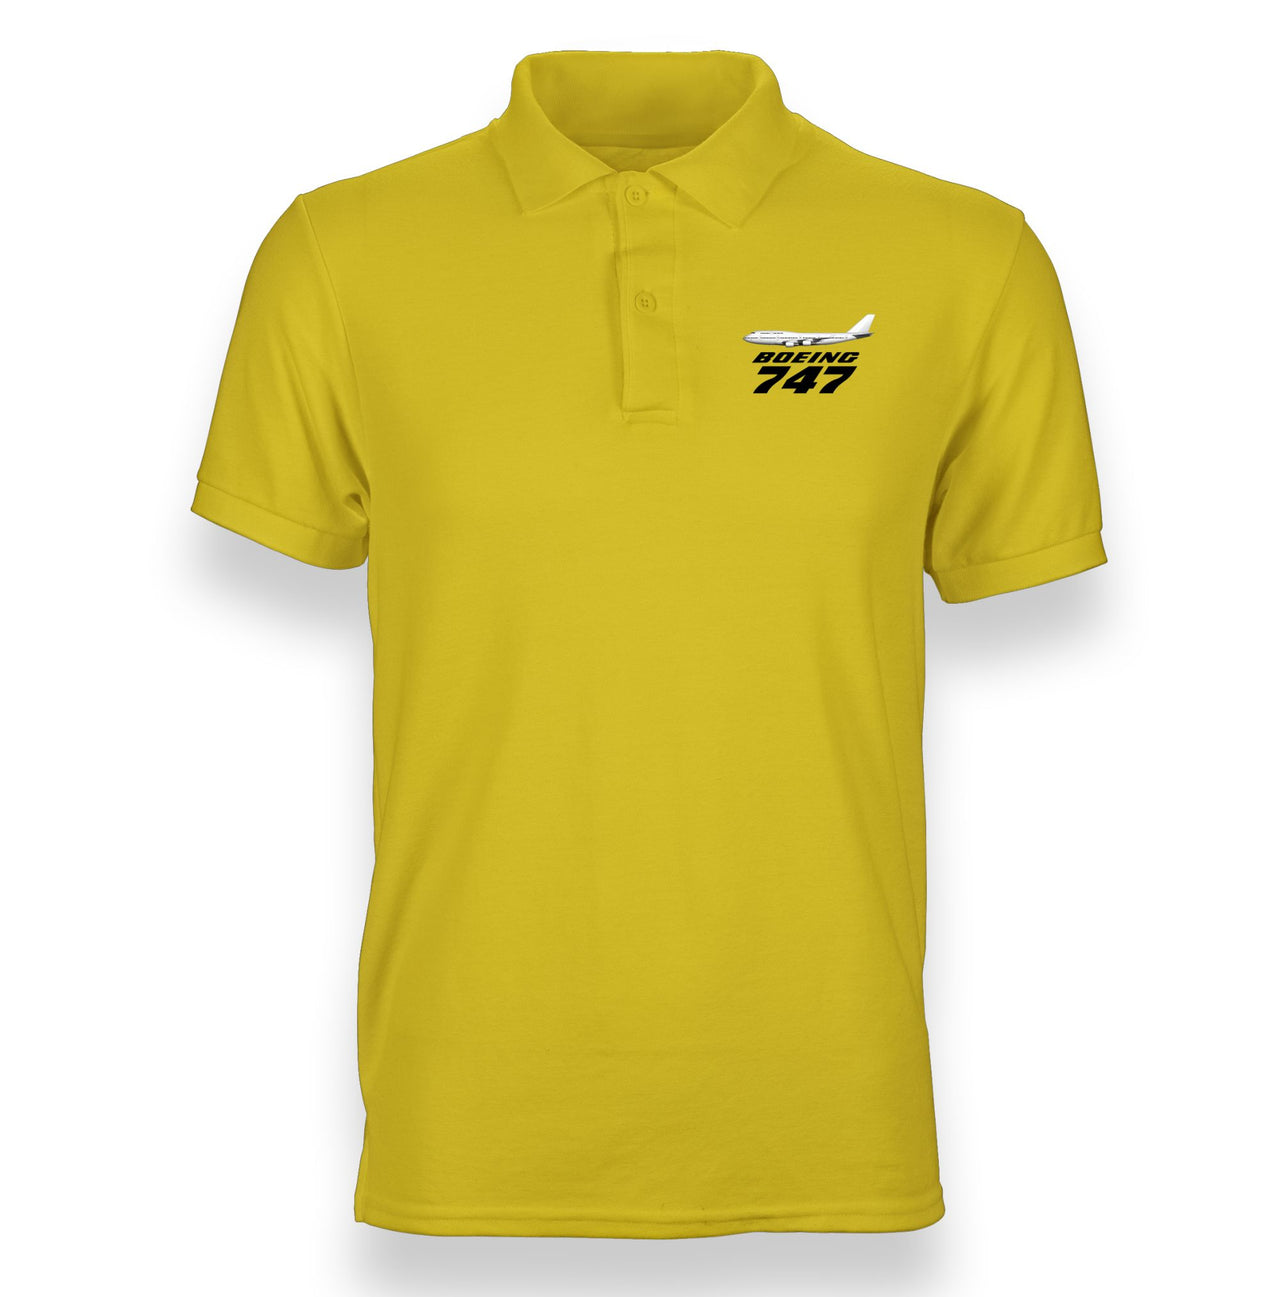 The Boeing 747 Designed "WOMEN" Polo T-Shirts